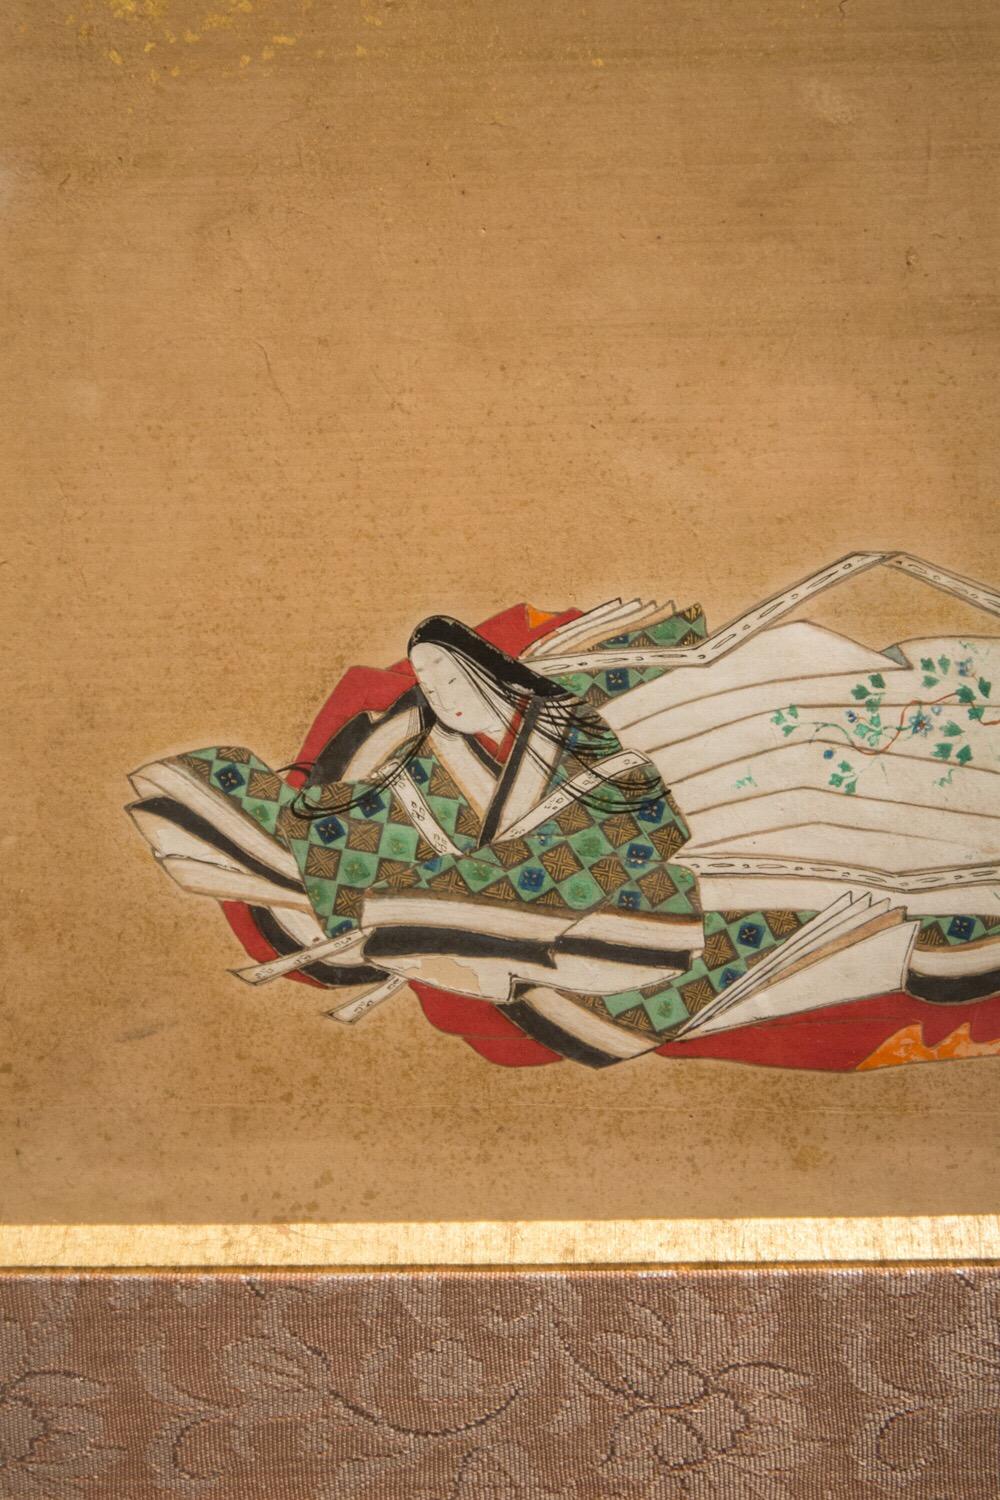 This painting depicts a woman poet sitting under golden rain, attributed to Tosa Naiki (1666-1750)
The technique is ink and color on paper and gold flakes.
It is under glass and has a giltwood frame.
Edo period, 18th century.
Probably based on a